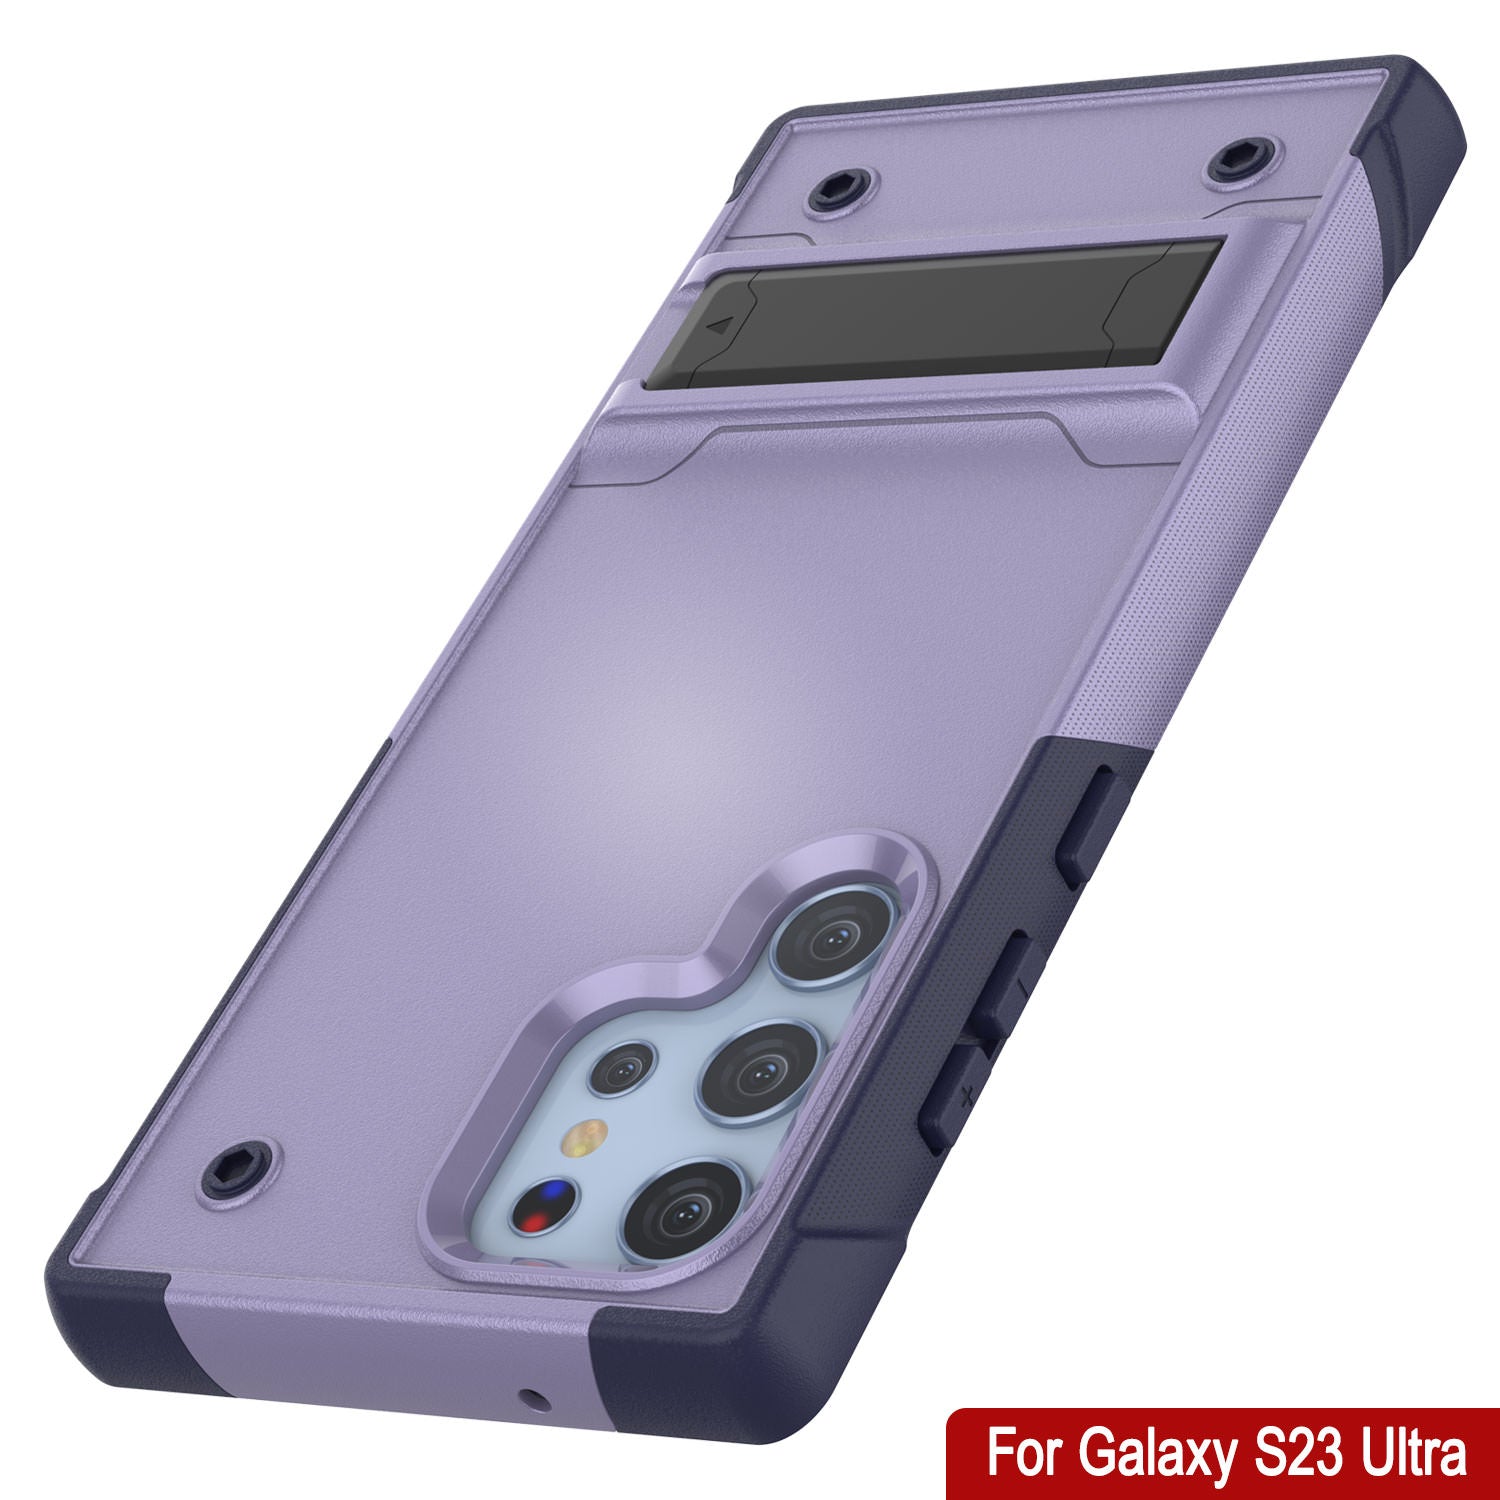 Punkcase Galaxy S24 Ultra Case [Reliance Series] Protective Hybrid Military Grade Cover W/Built-in Kickstand [Purple-Navy]